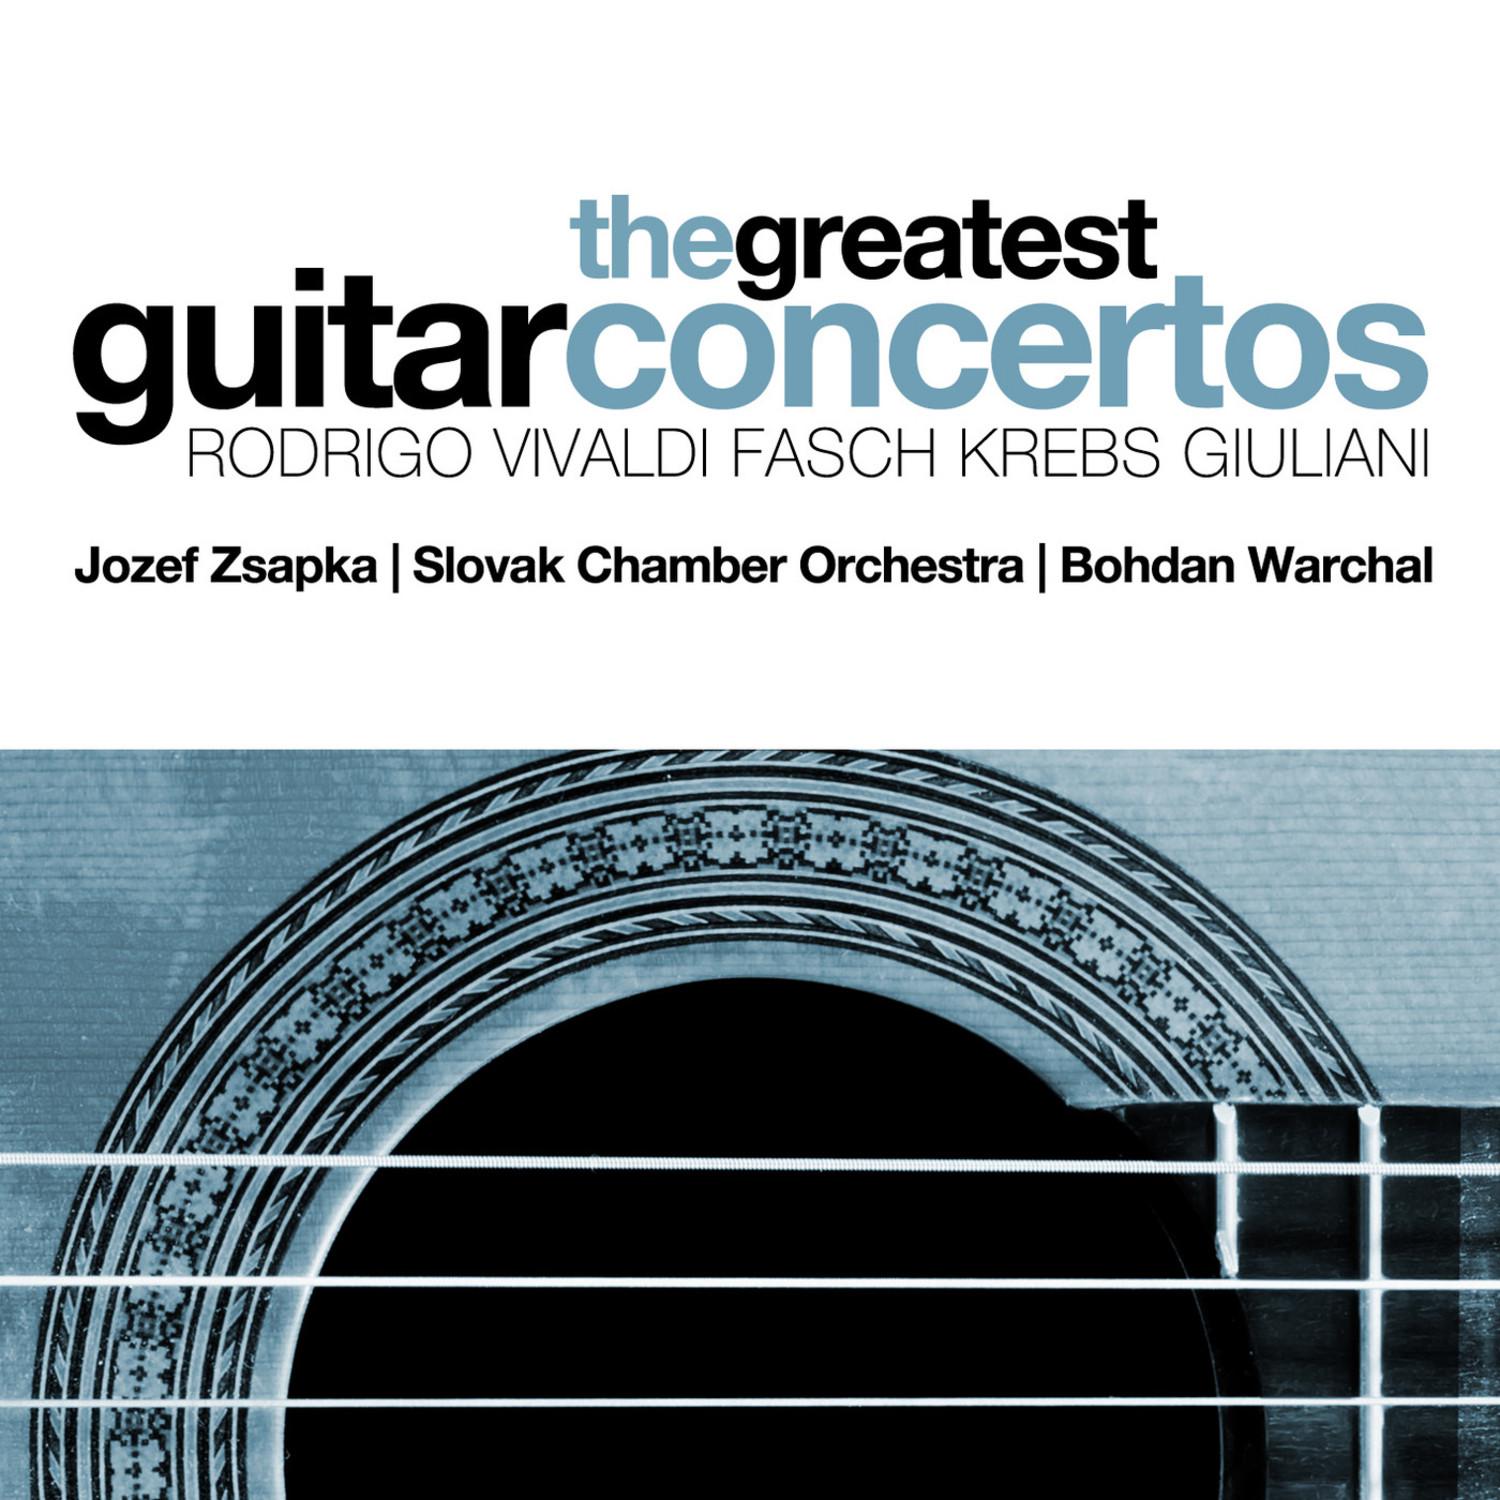 Concerto in G Major for Guitar and Orchestra, WoO: I. Allegro